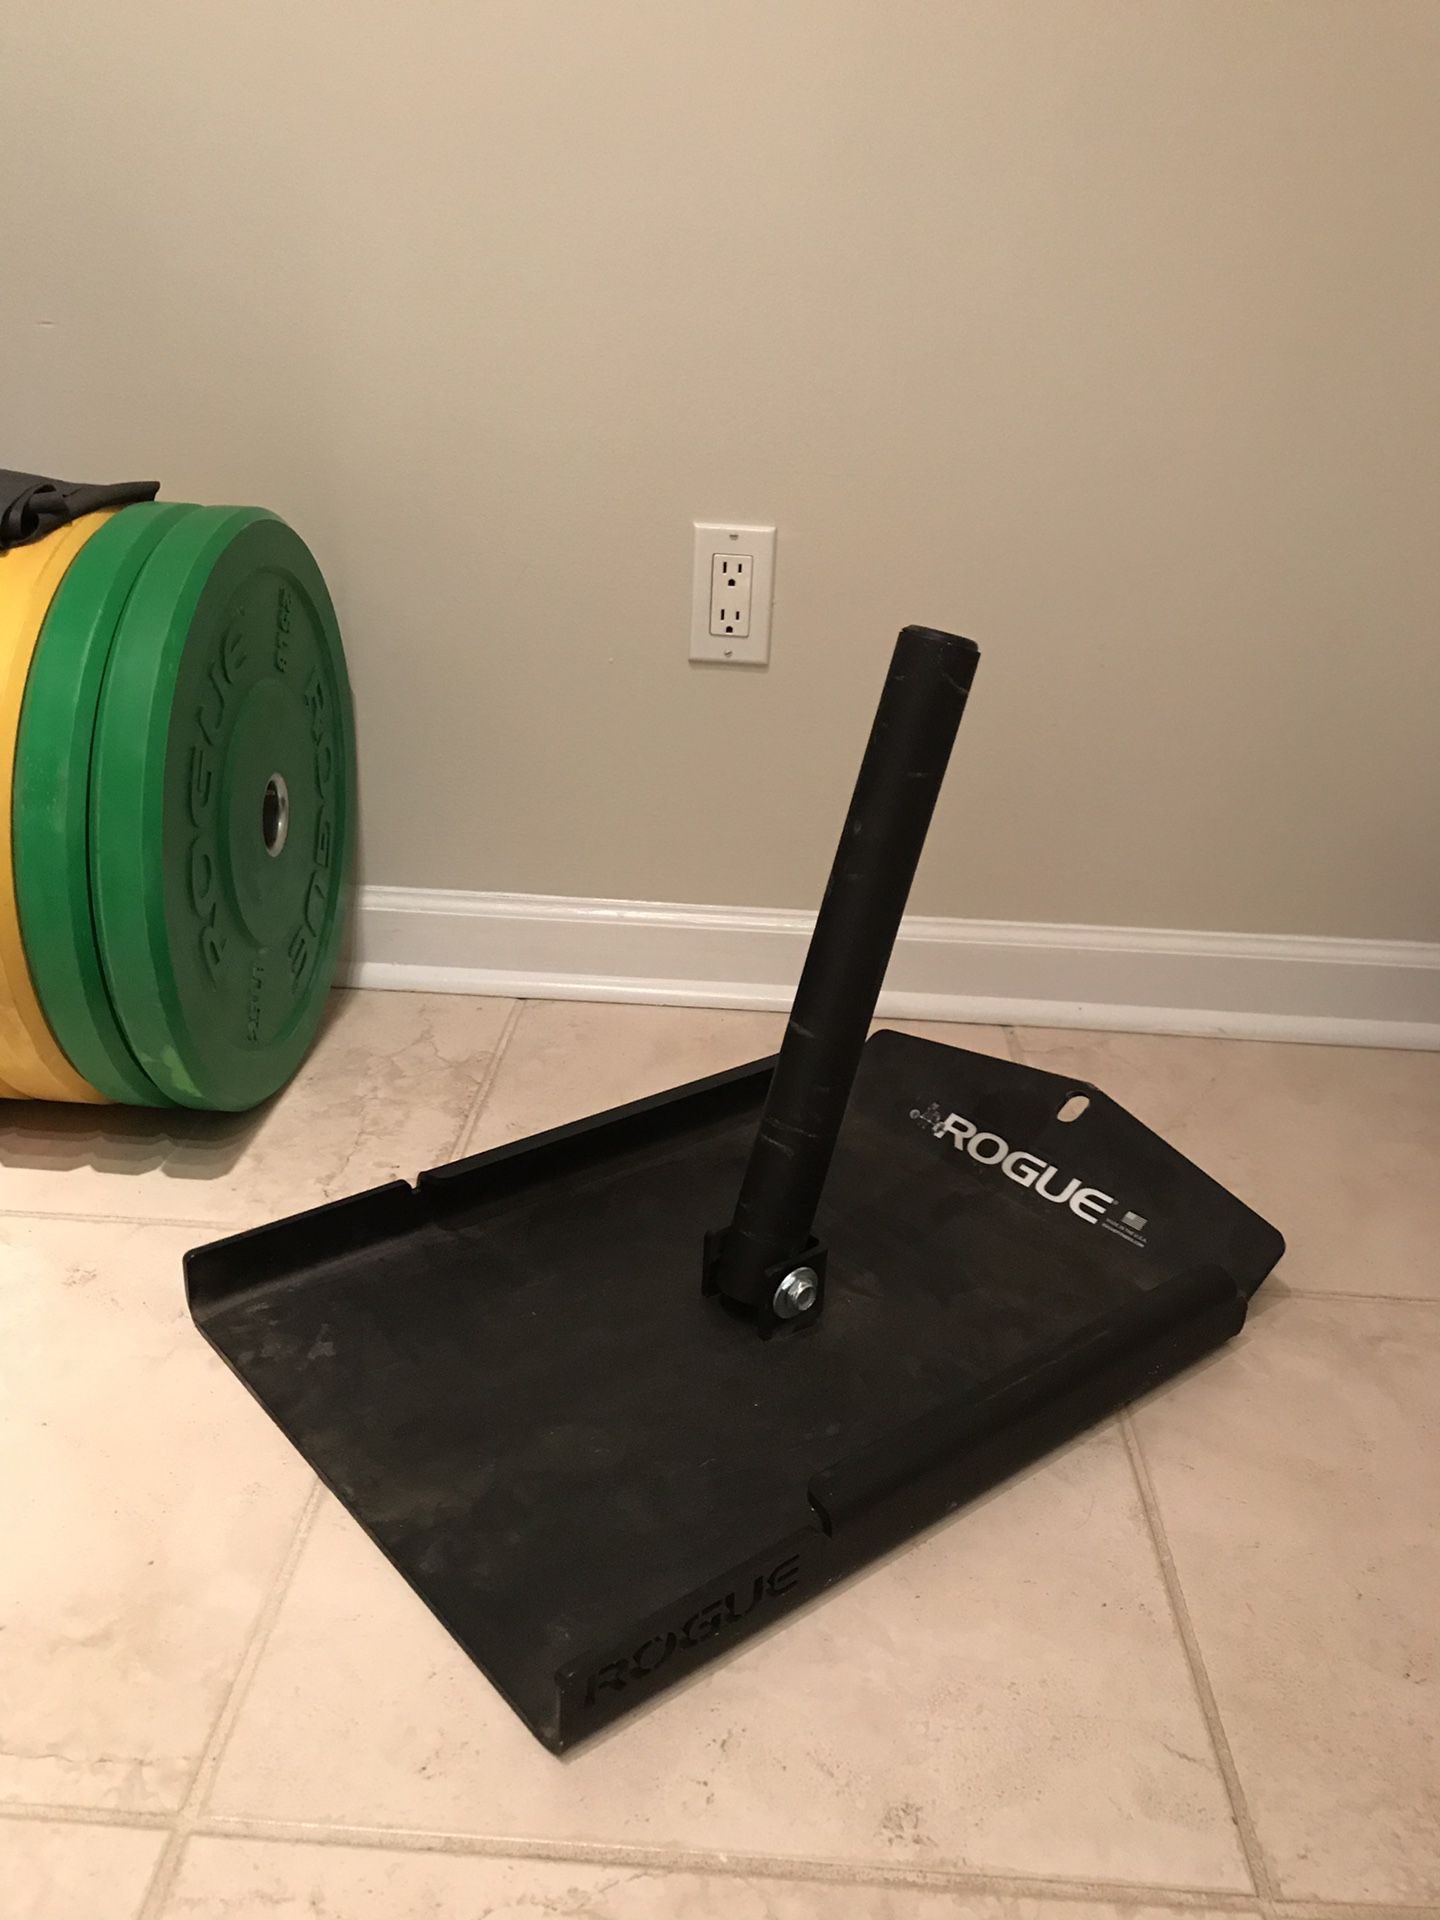 Rogue s25 fat boy weight sled